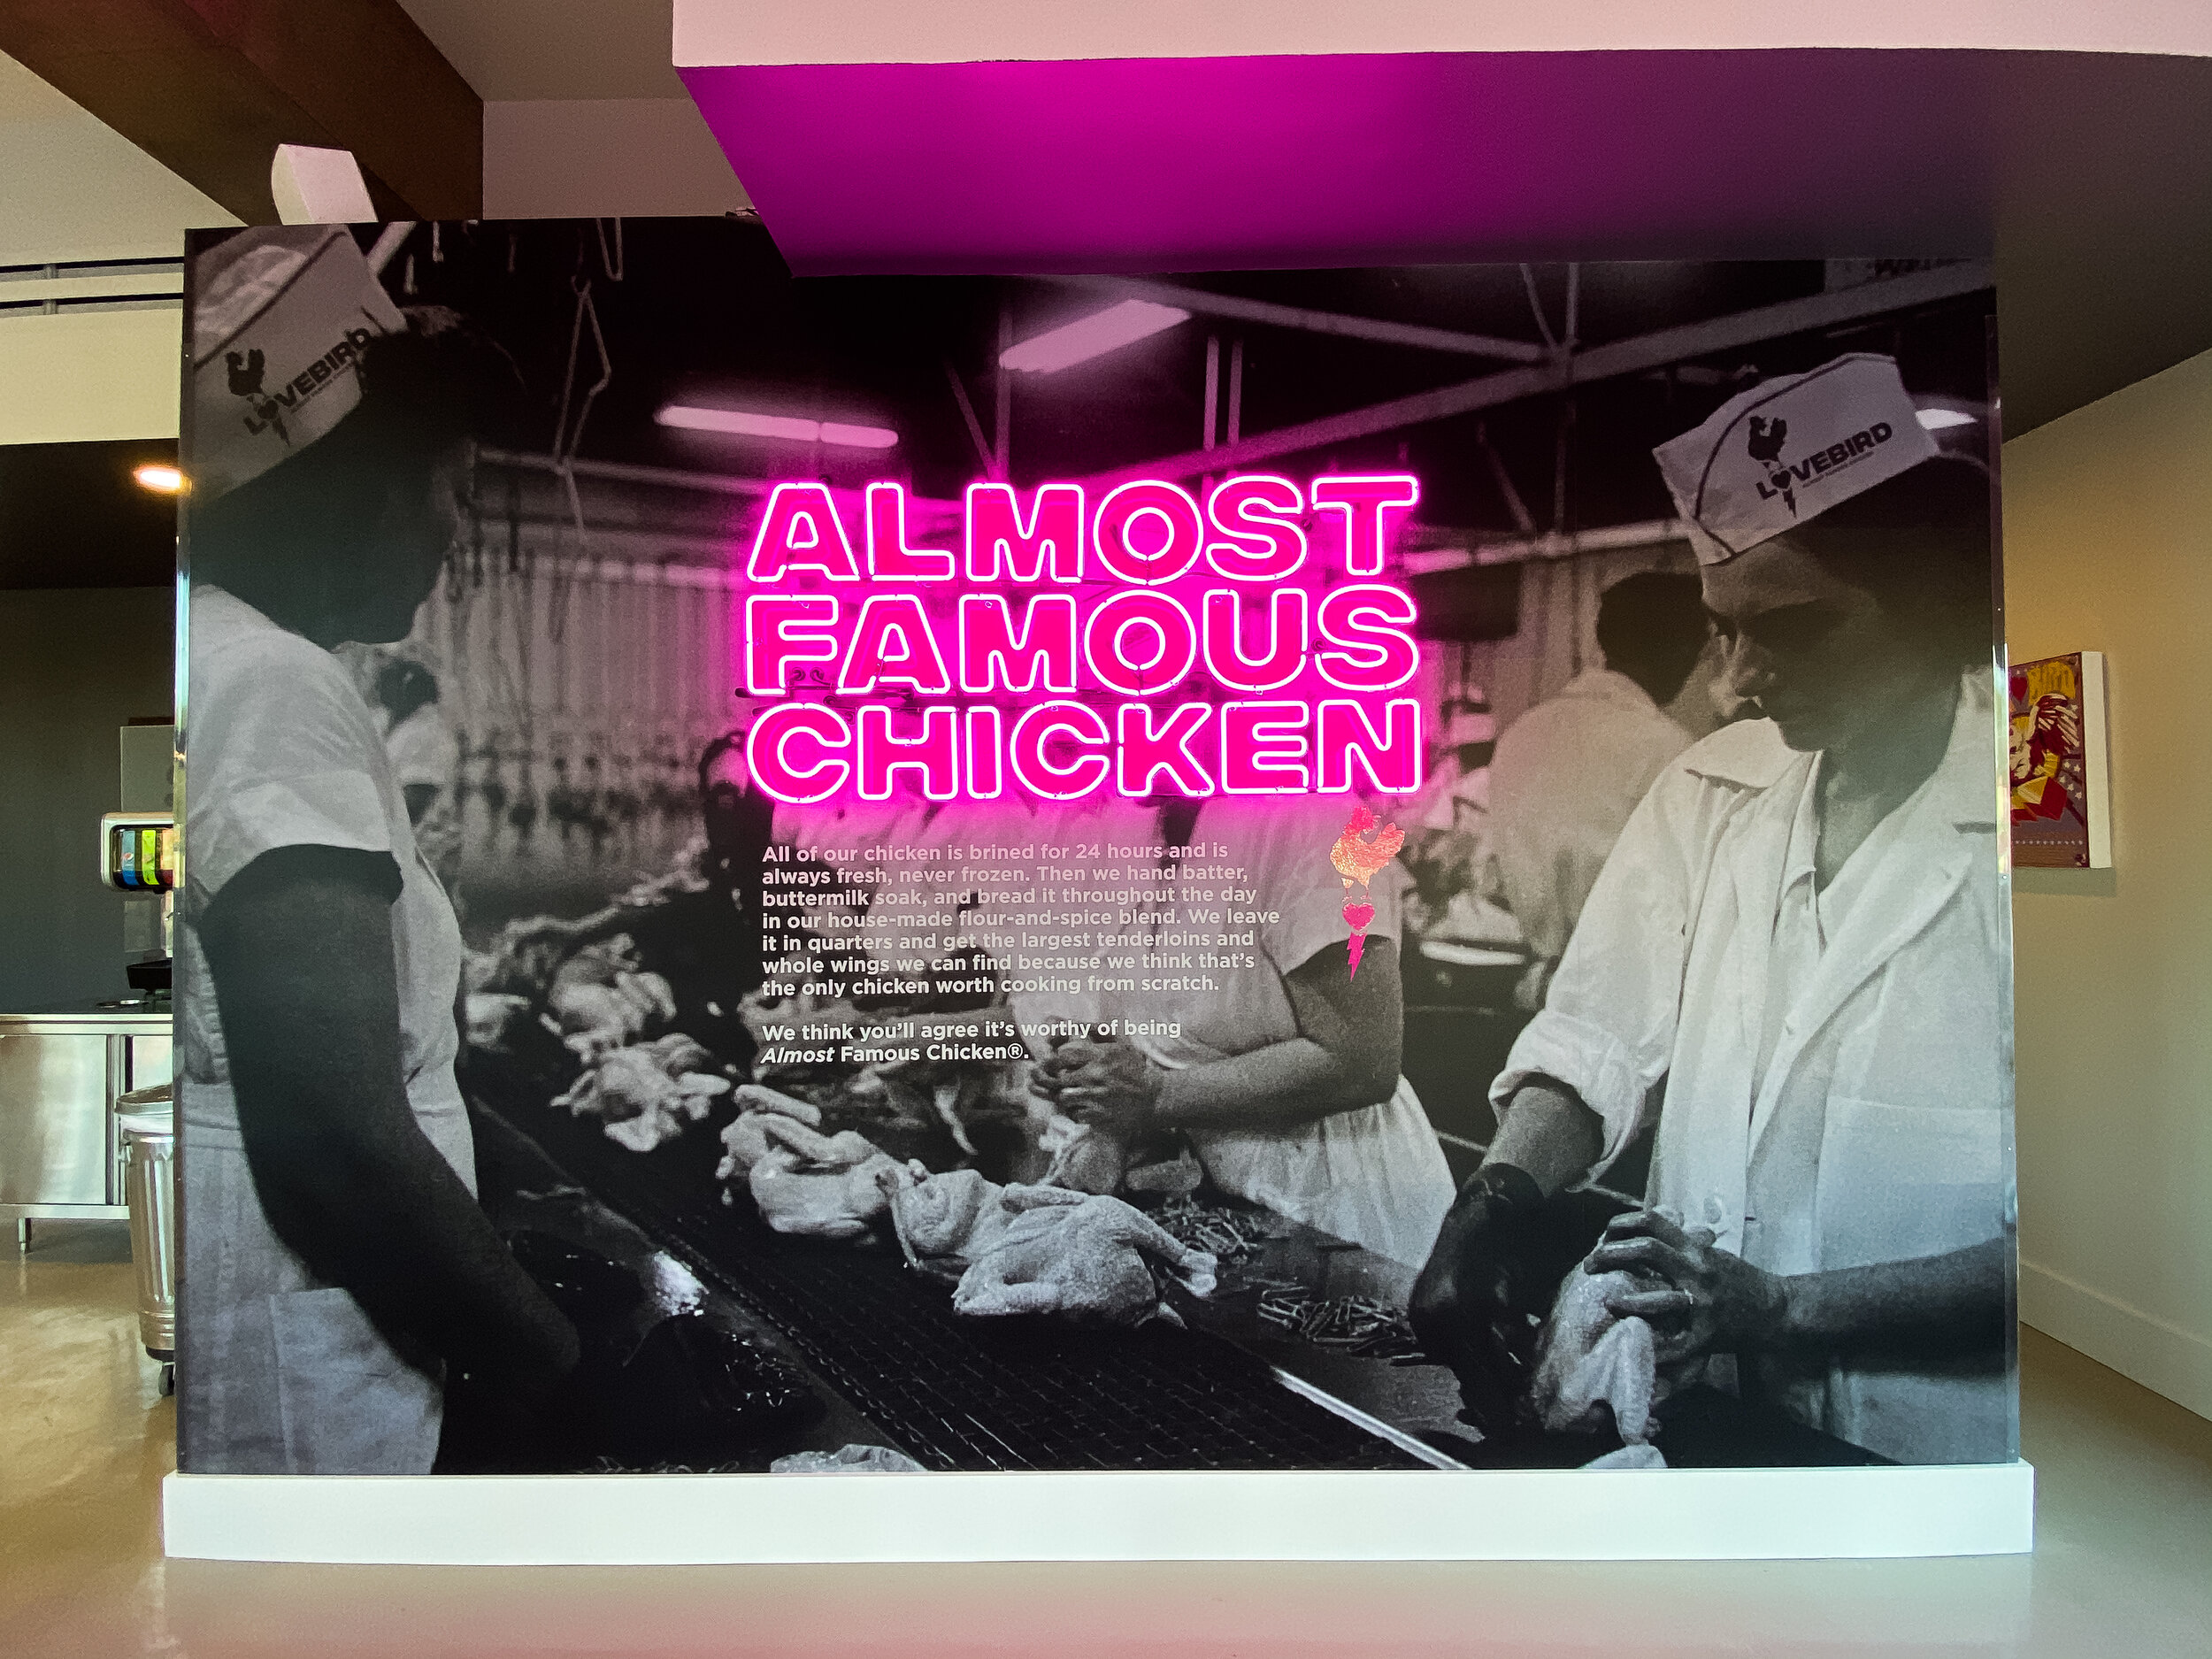 Interior image of LoveBird - Almost Famous Chicken